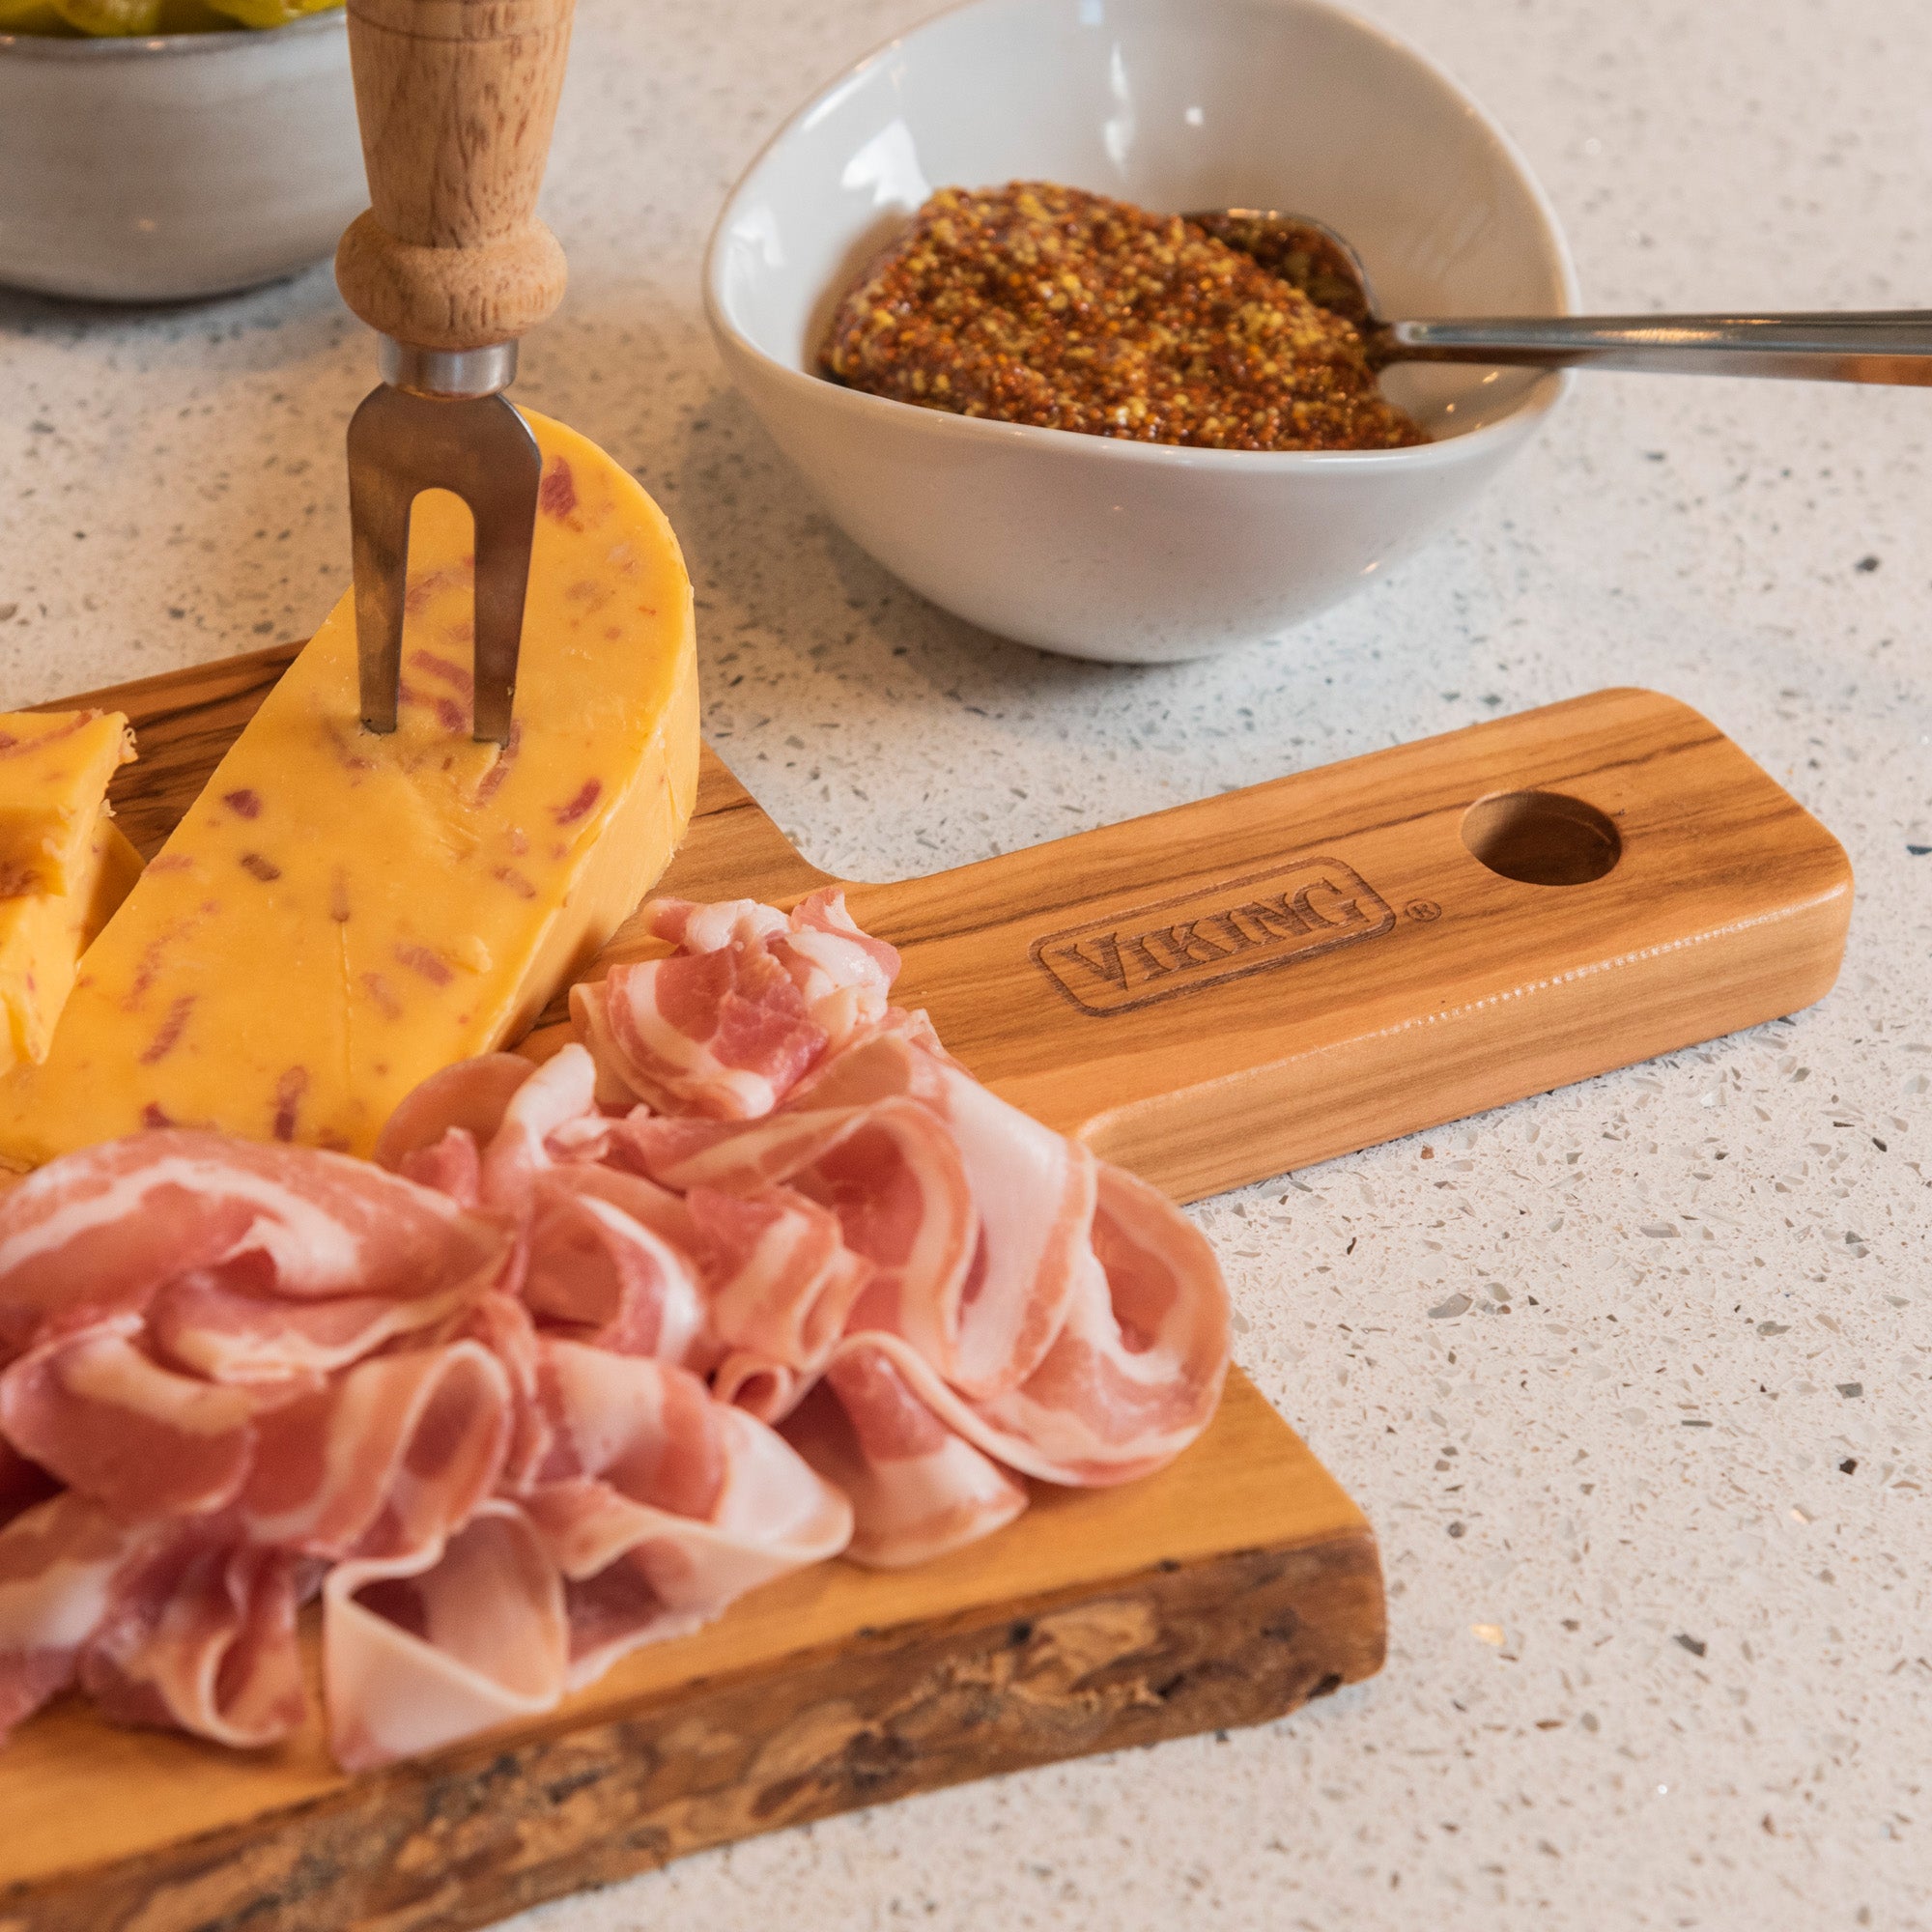 Paddle cheese and charcuterie board, or chopping board